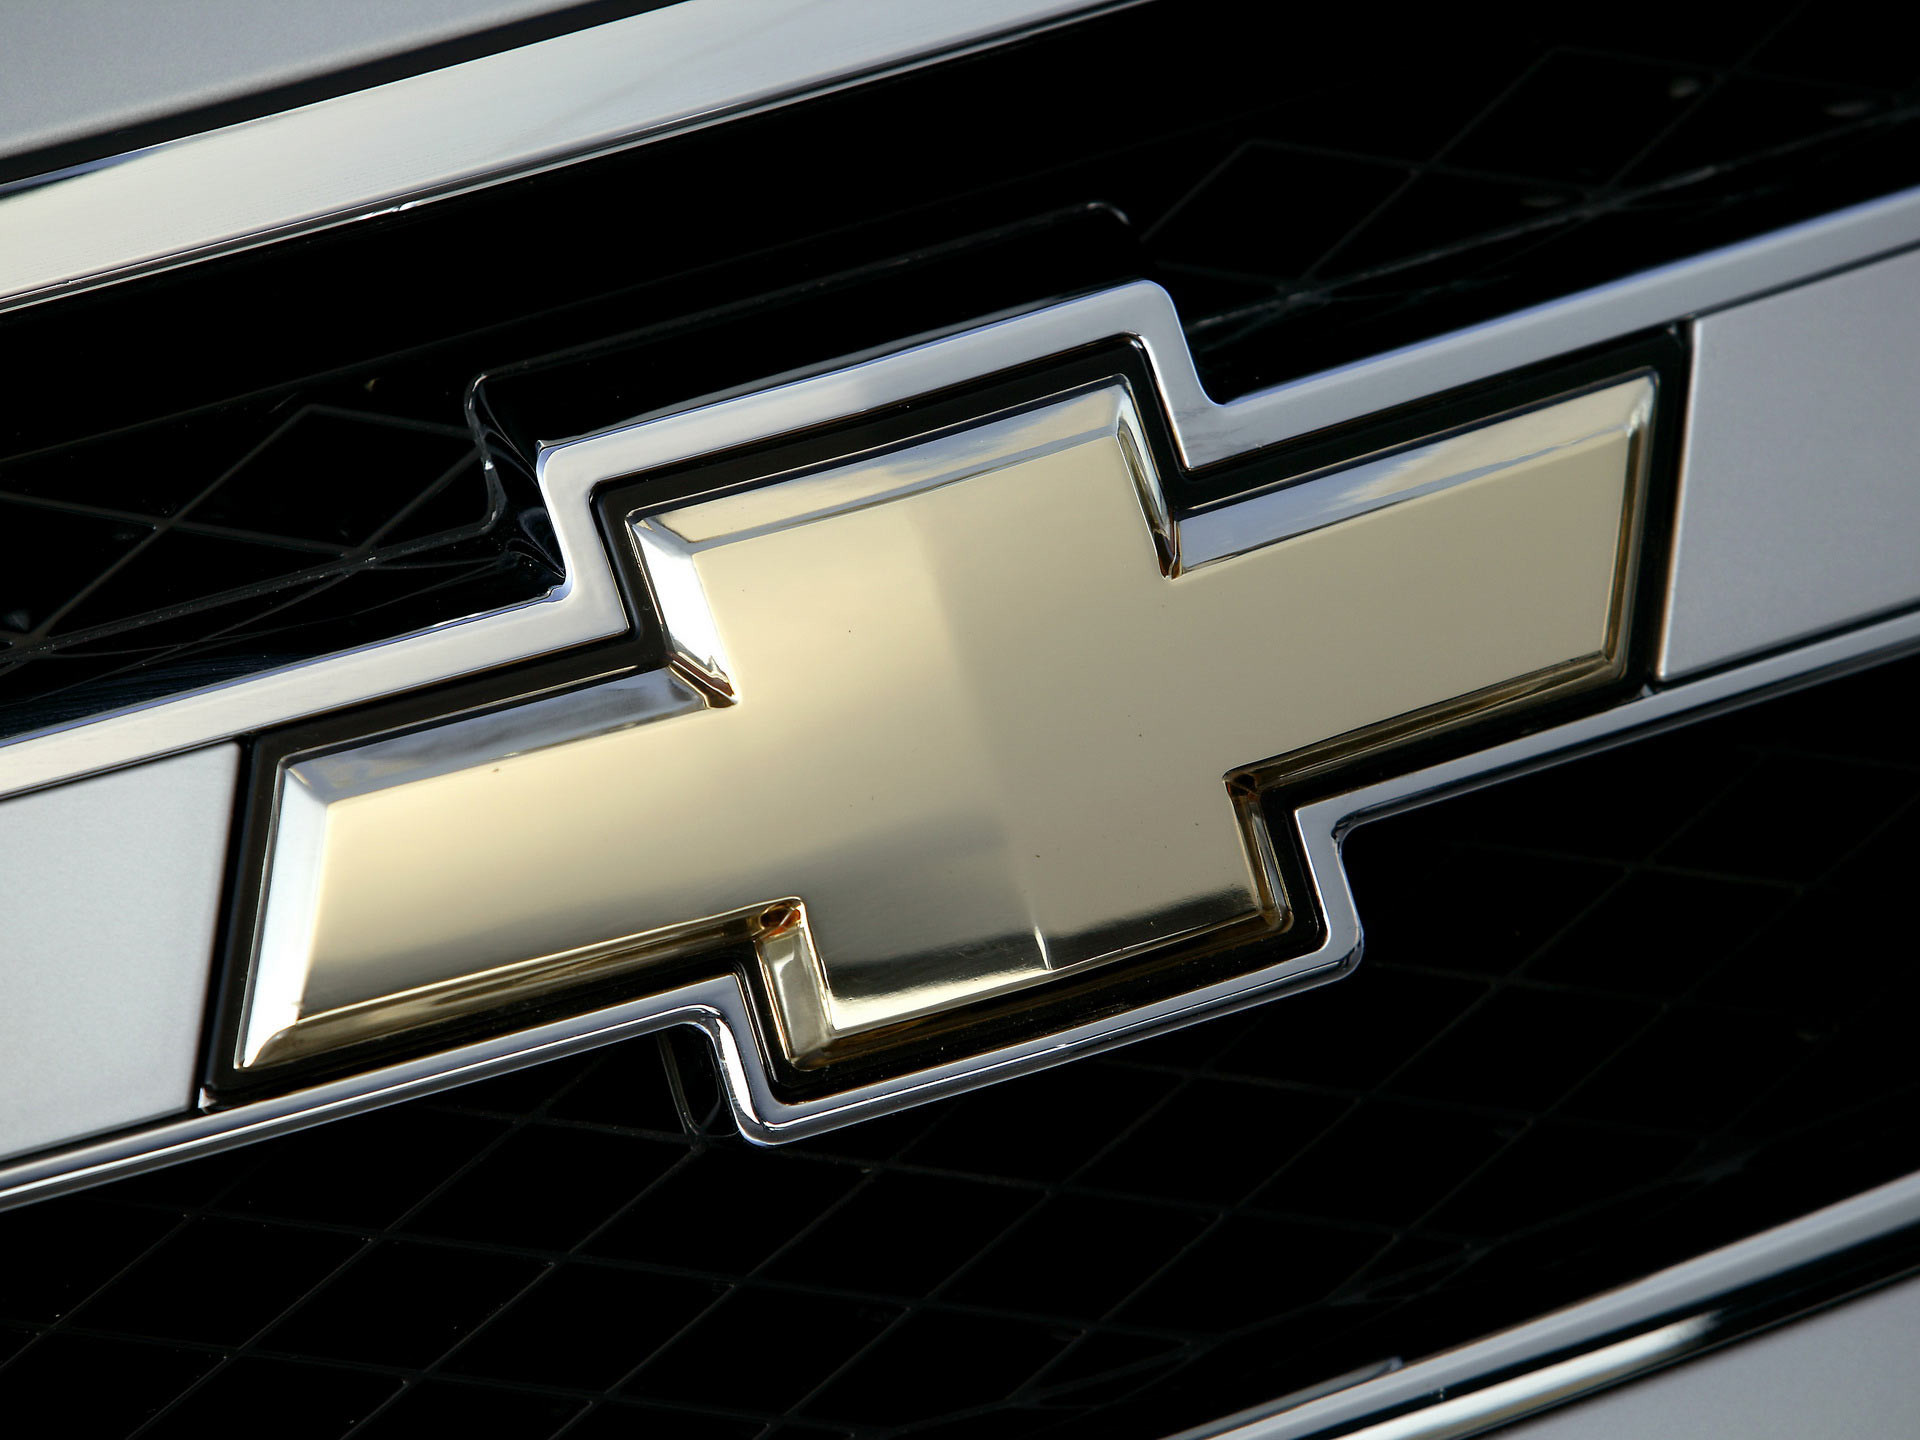 1920x1440 Chevy Logo Wallpaper 4377 Hd Wallpapers in Logos Imagescicom 